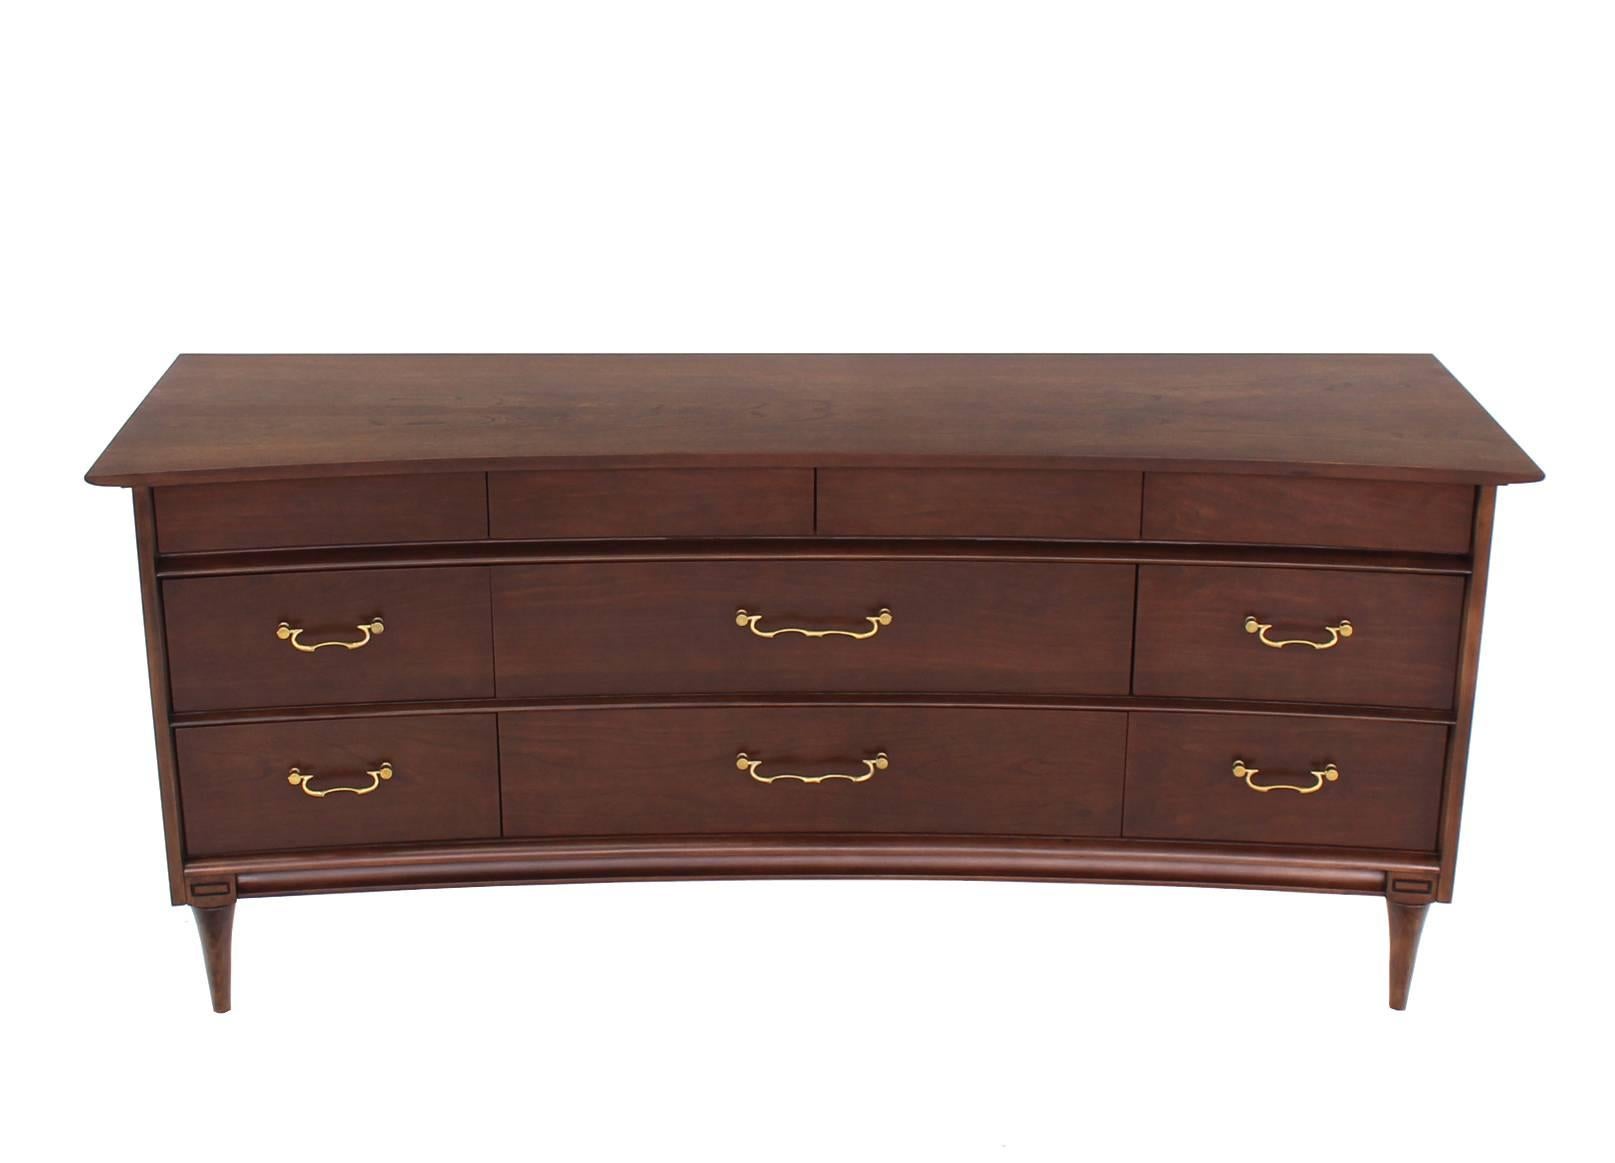 Very nice Mid-Century Modern concave top dresser with brass pulls.